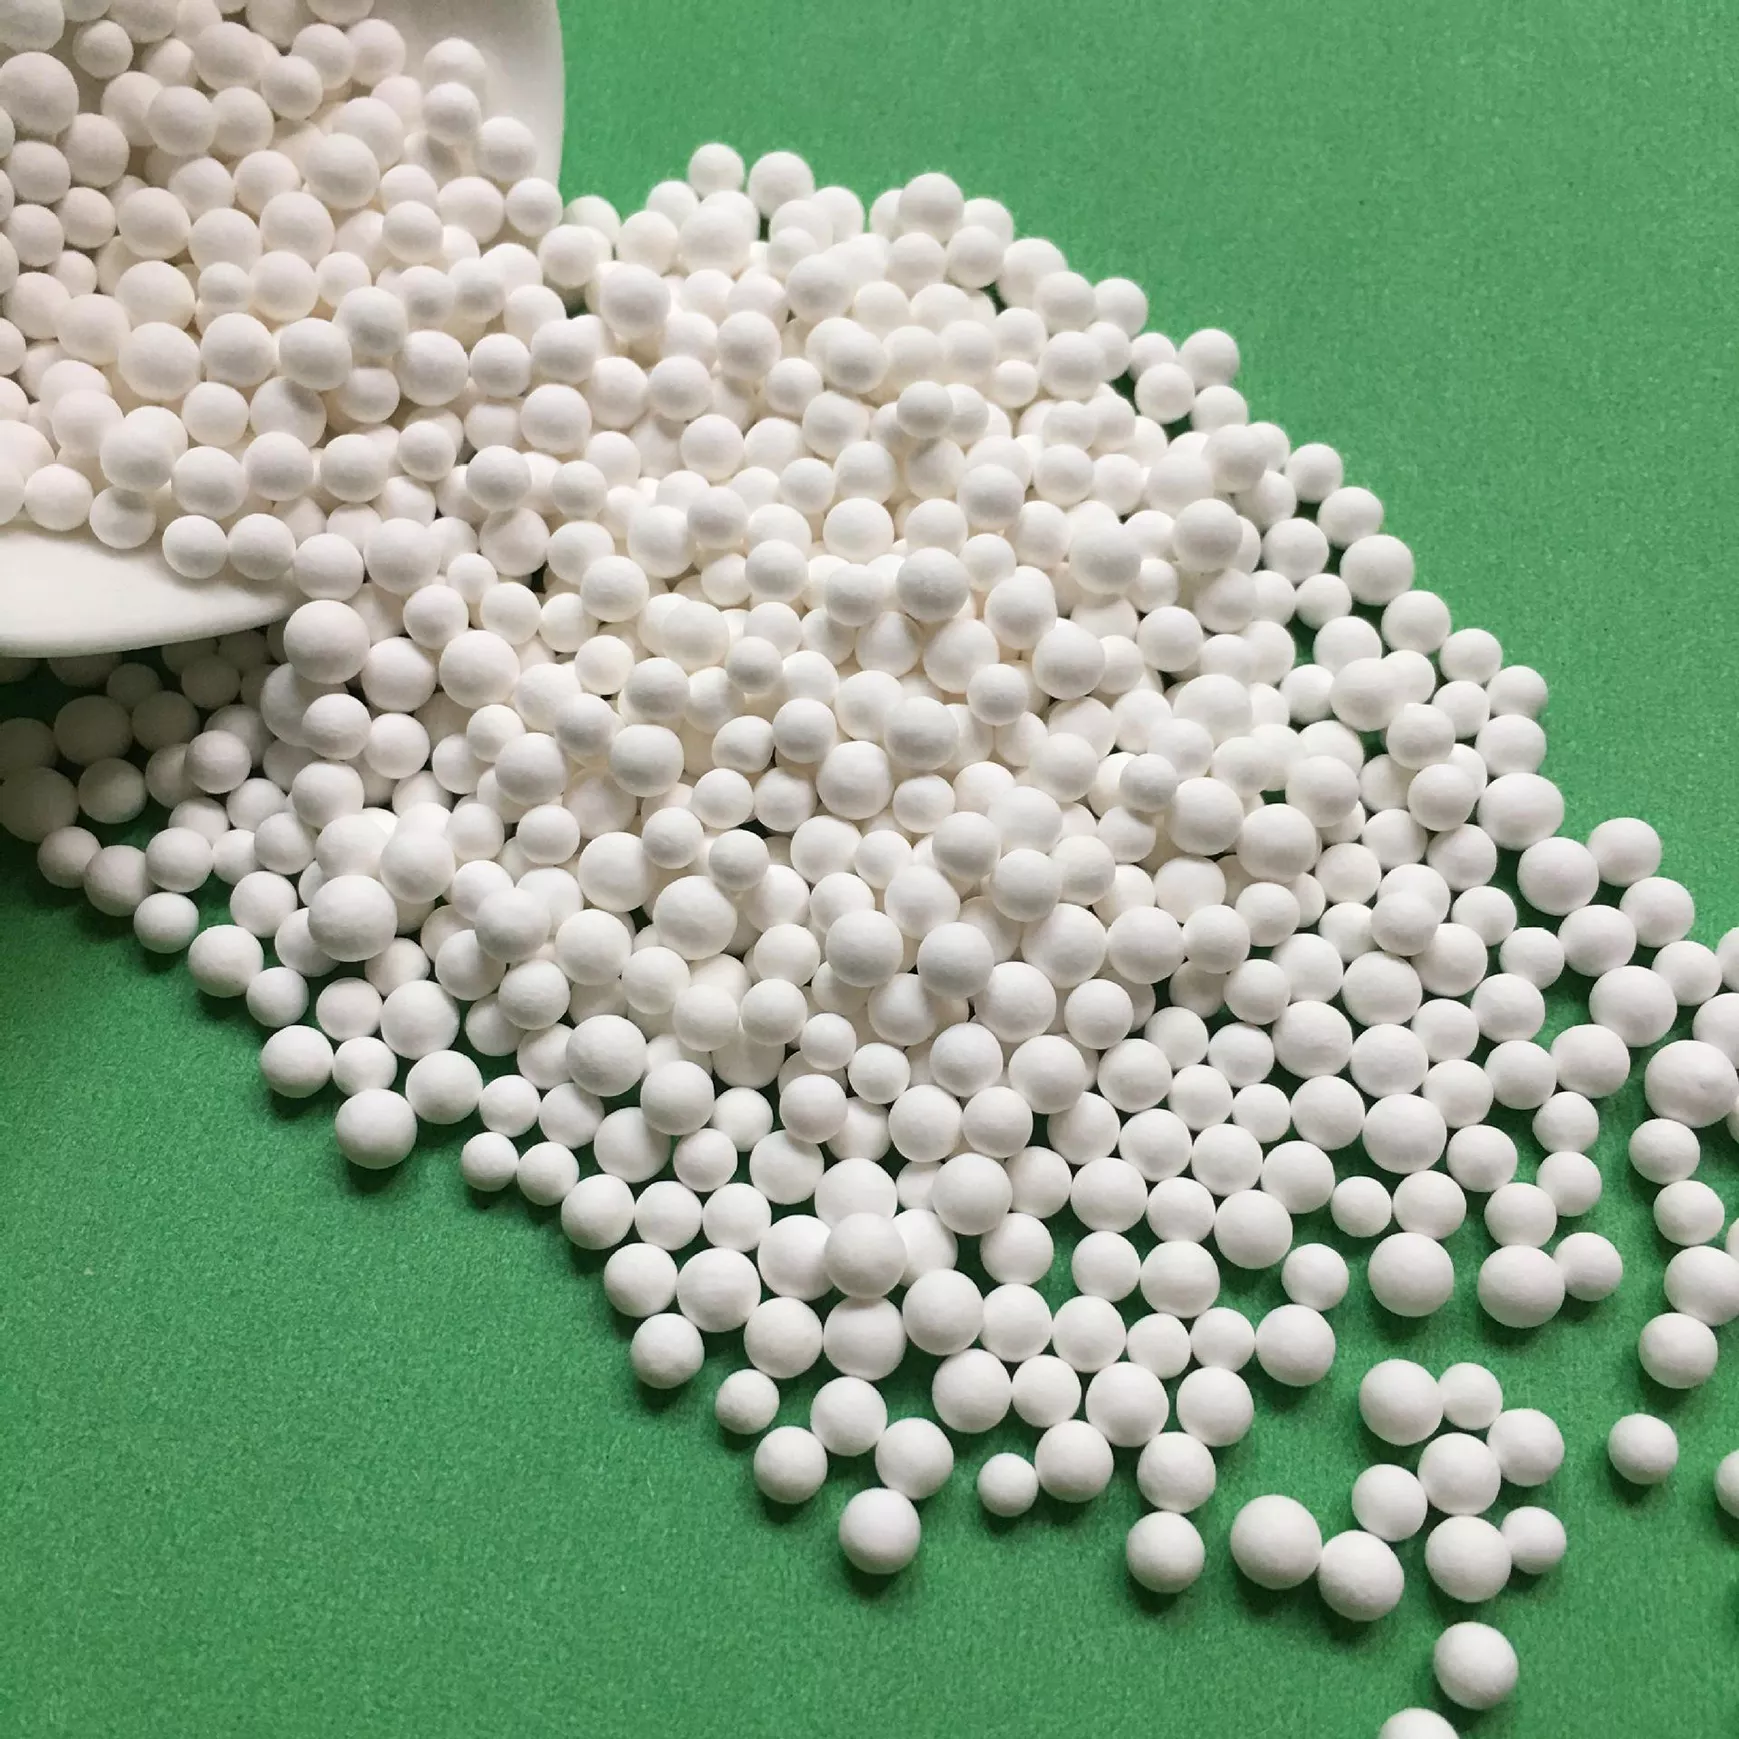 Can ceramic alumina balls be used for homogenization or mixing of materials?